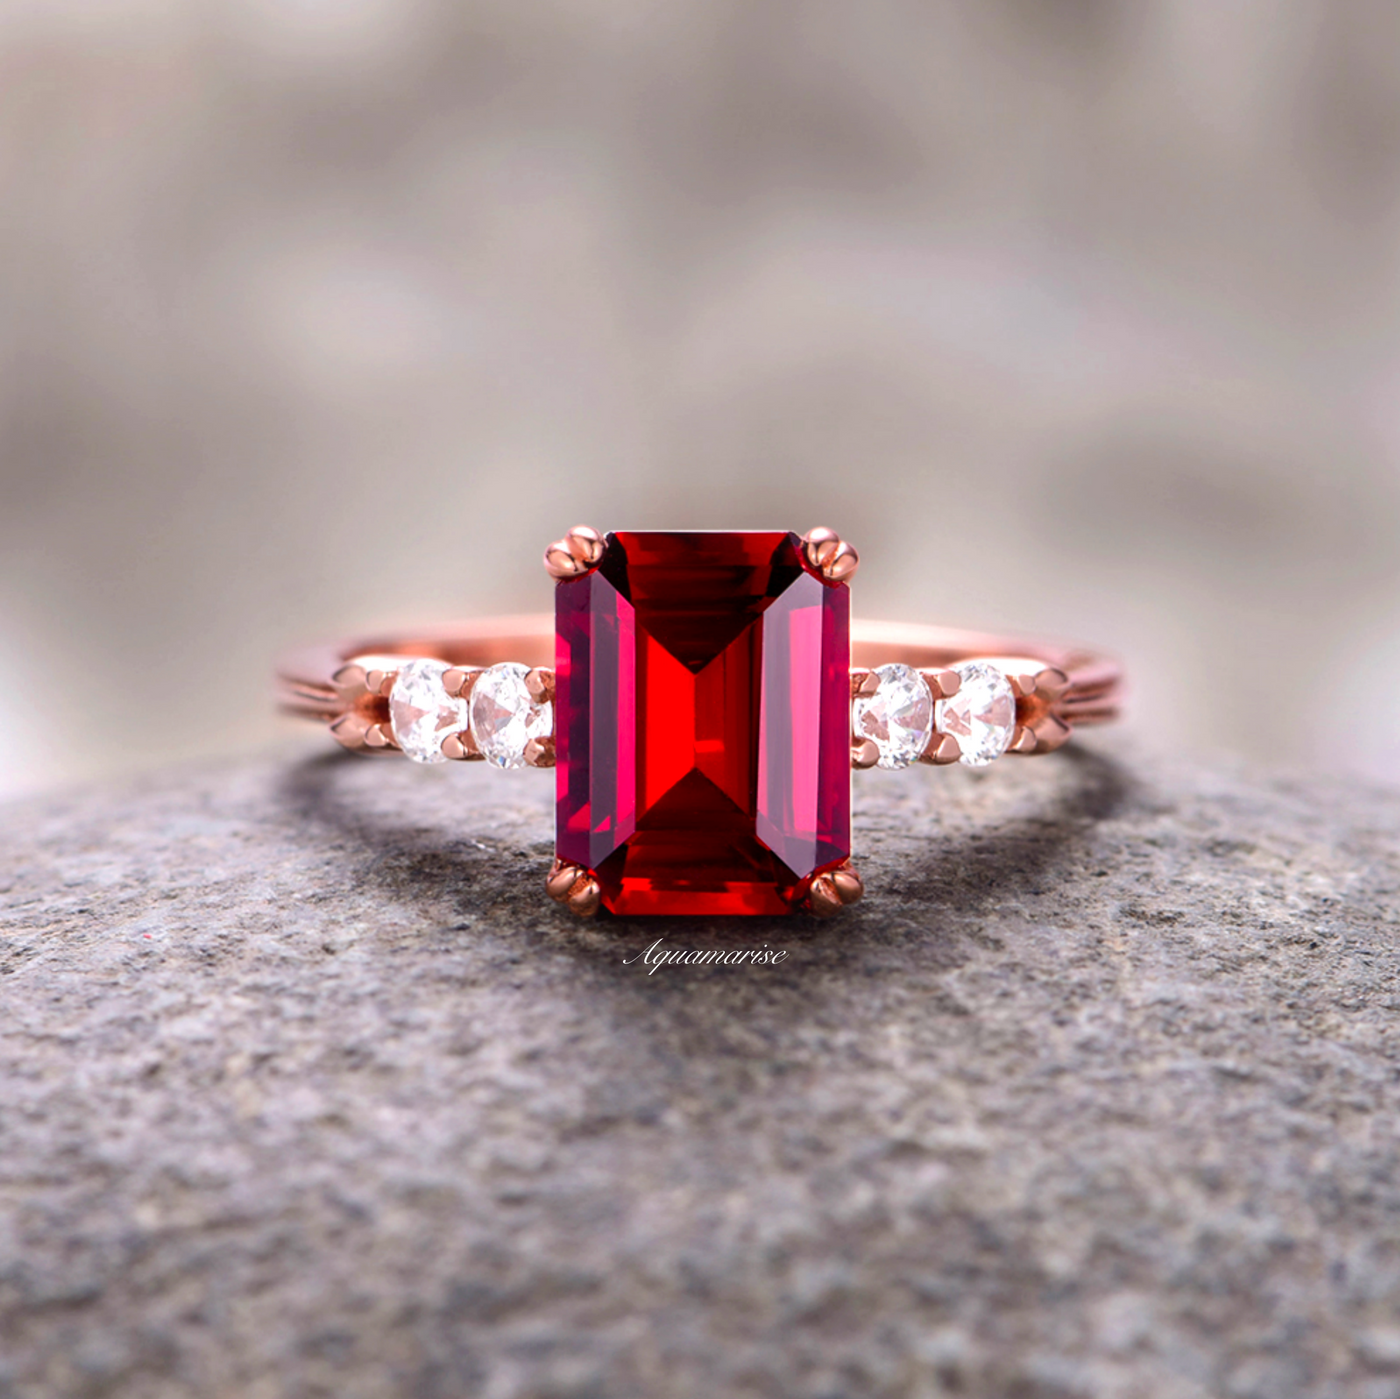 Natural Red Garnet Engagement Ring For Women- 14K Rose Gold Vermeil Emerald Cut Unique Red Garnet Promise Ring Anniversary Gift Idea For Her